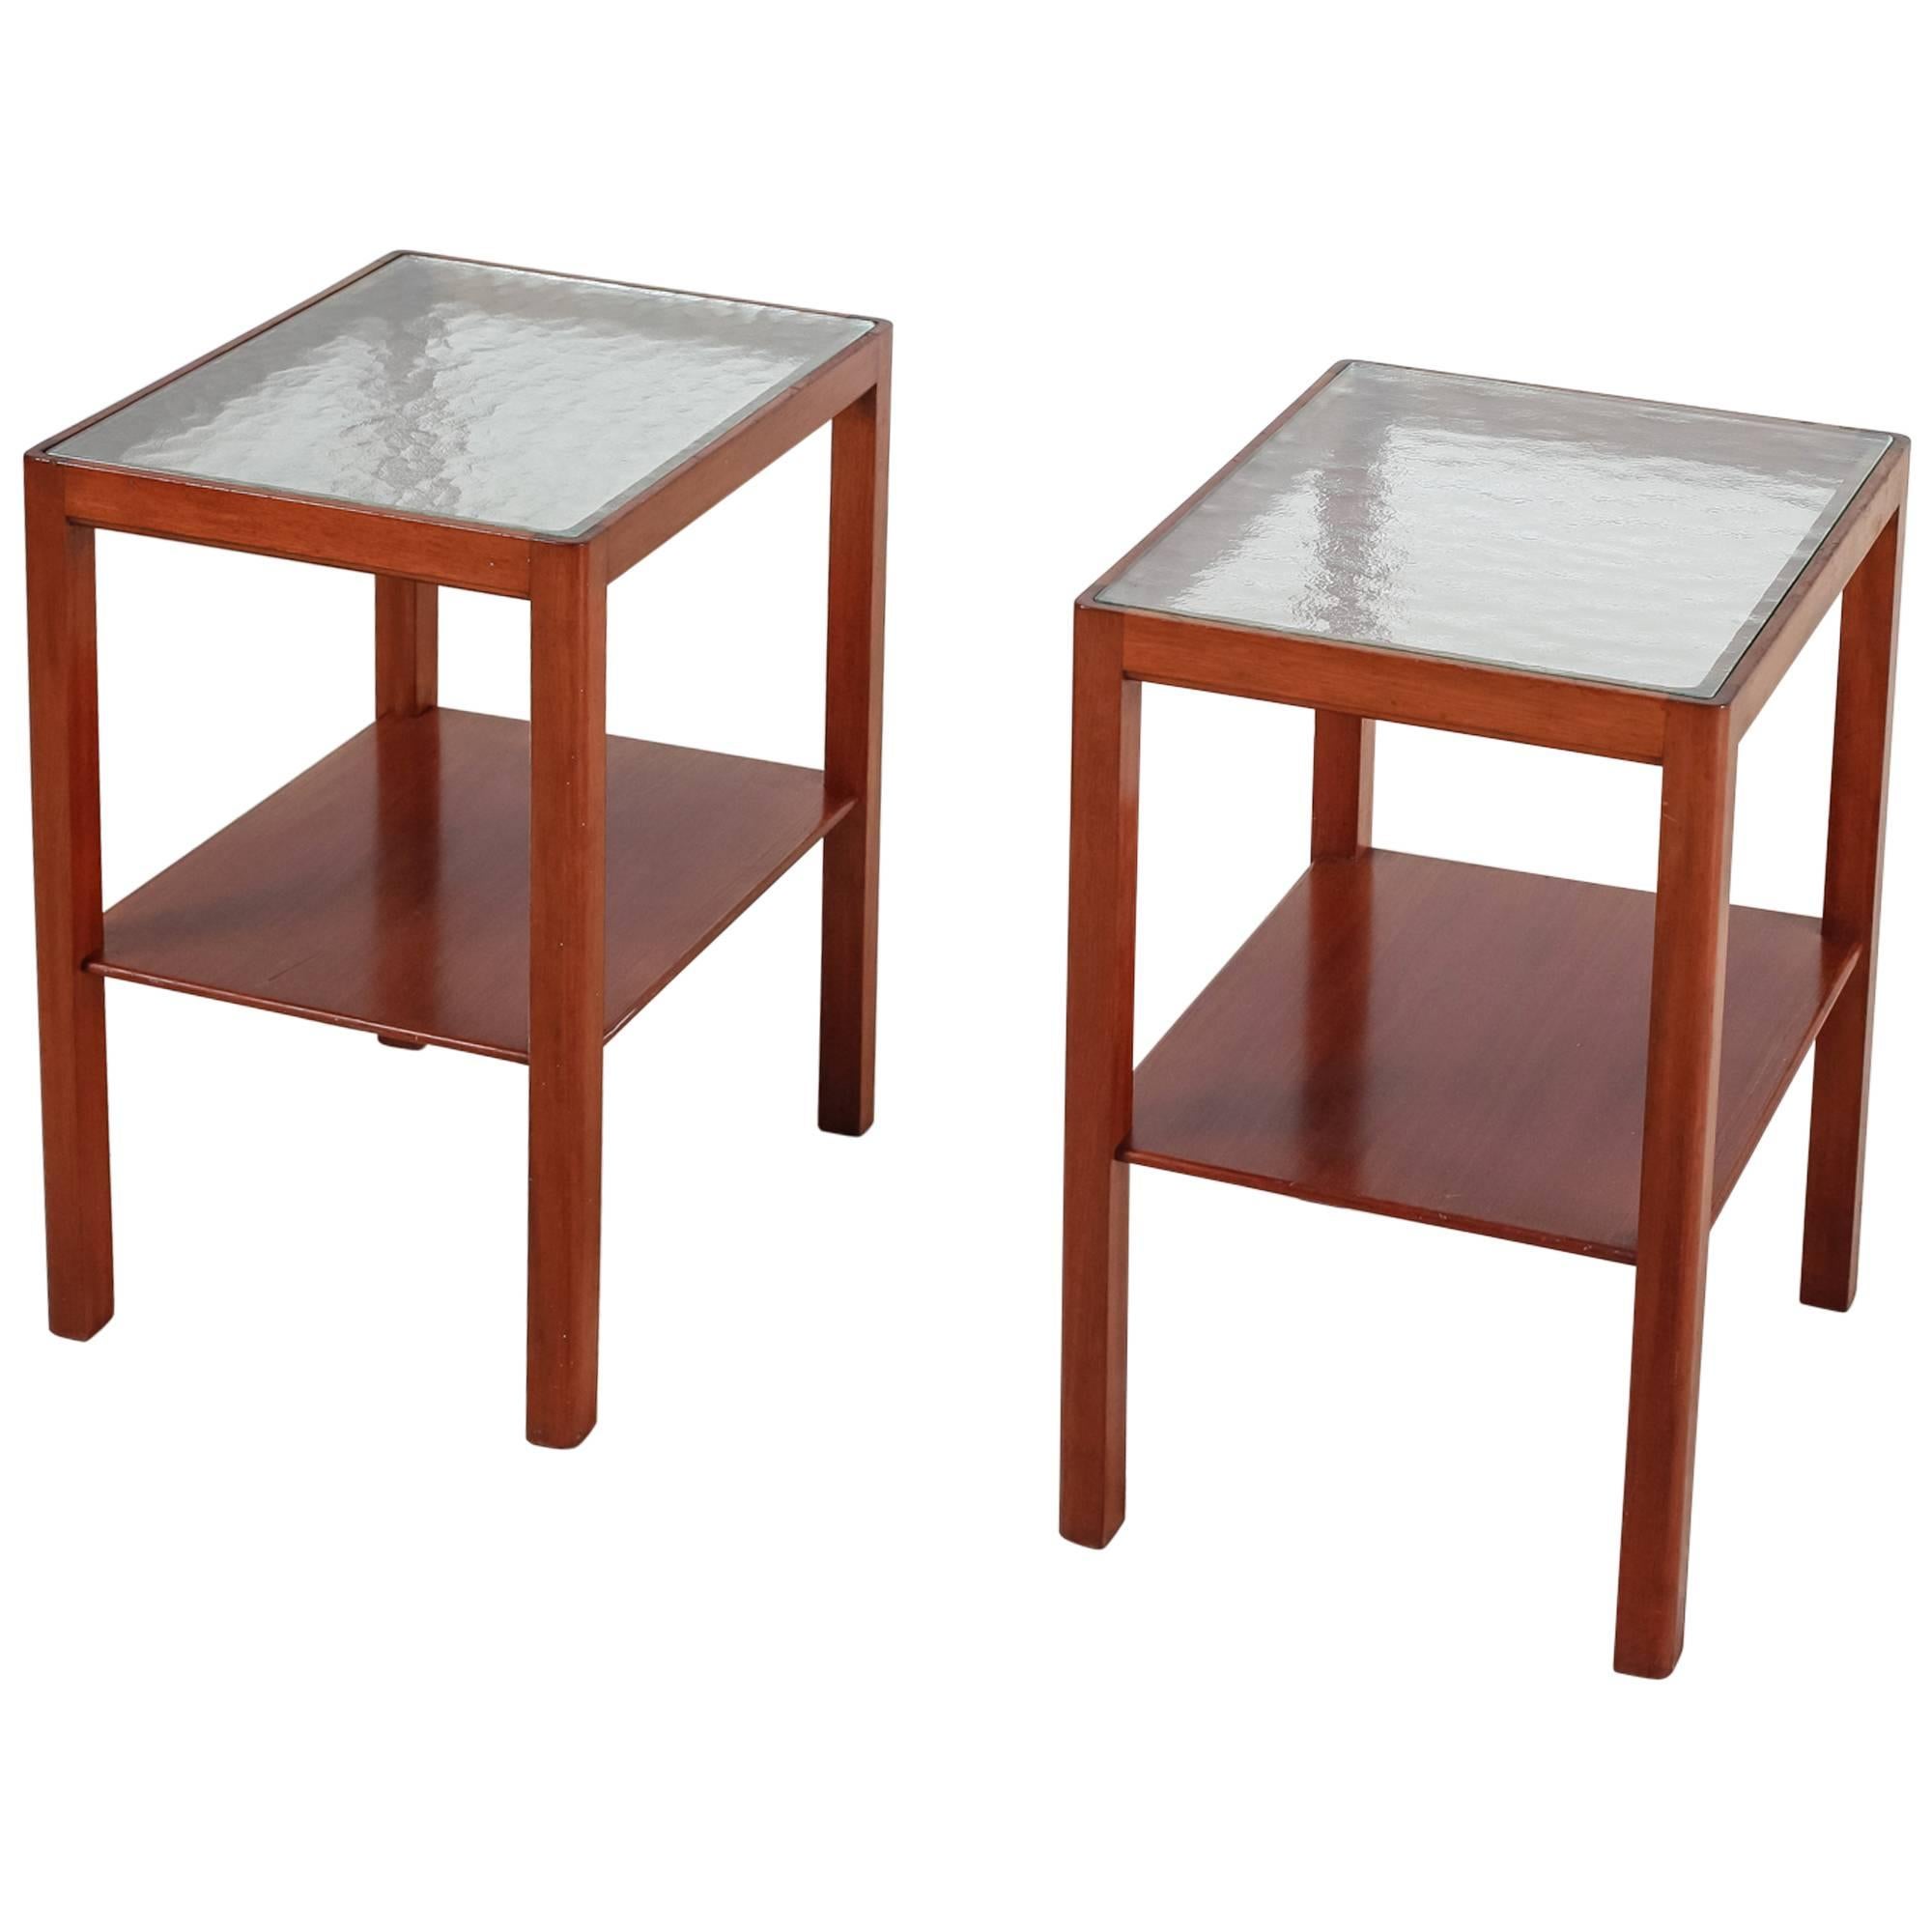 Thorald Madsen Pair of Mahogany Side Tables with Glass Top, Denmark, 1930s For Sale